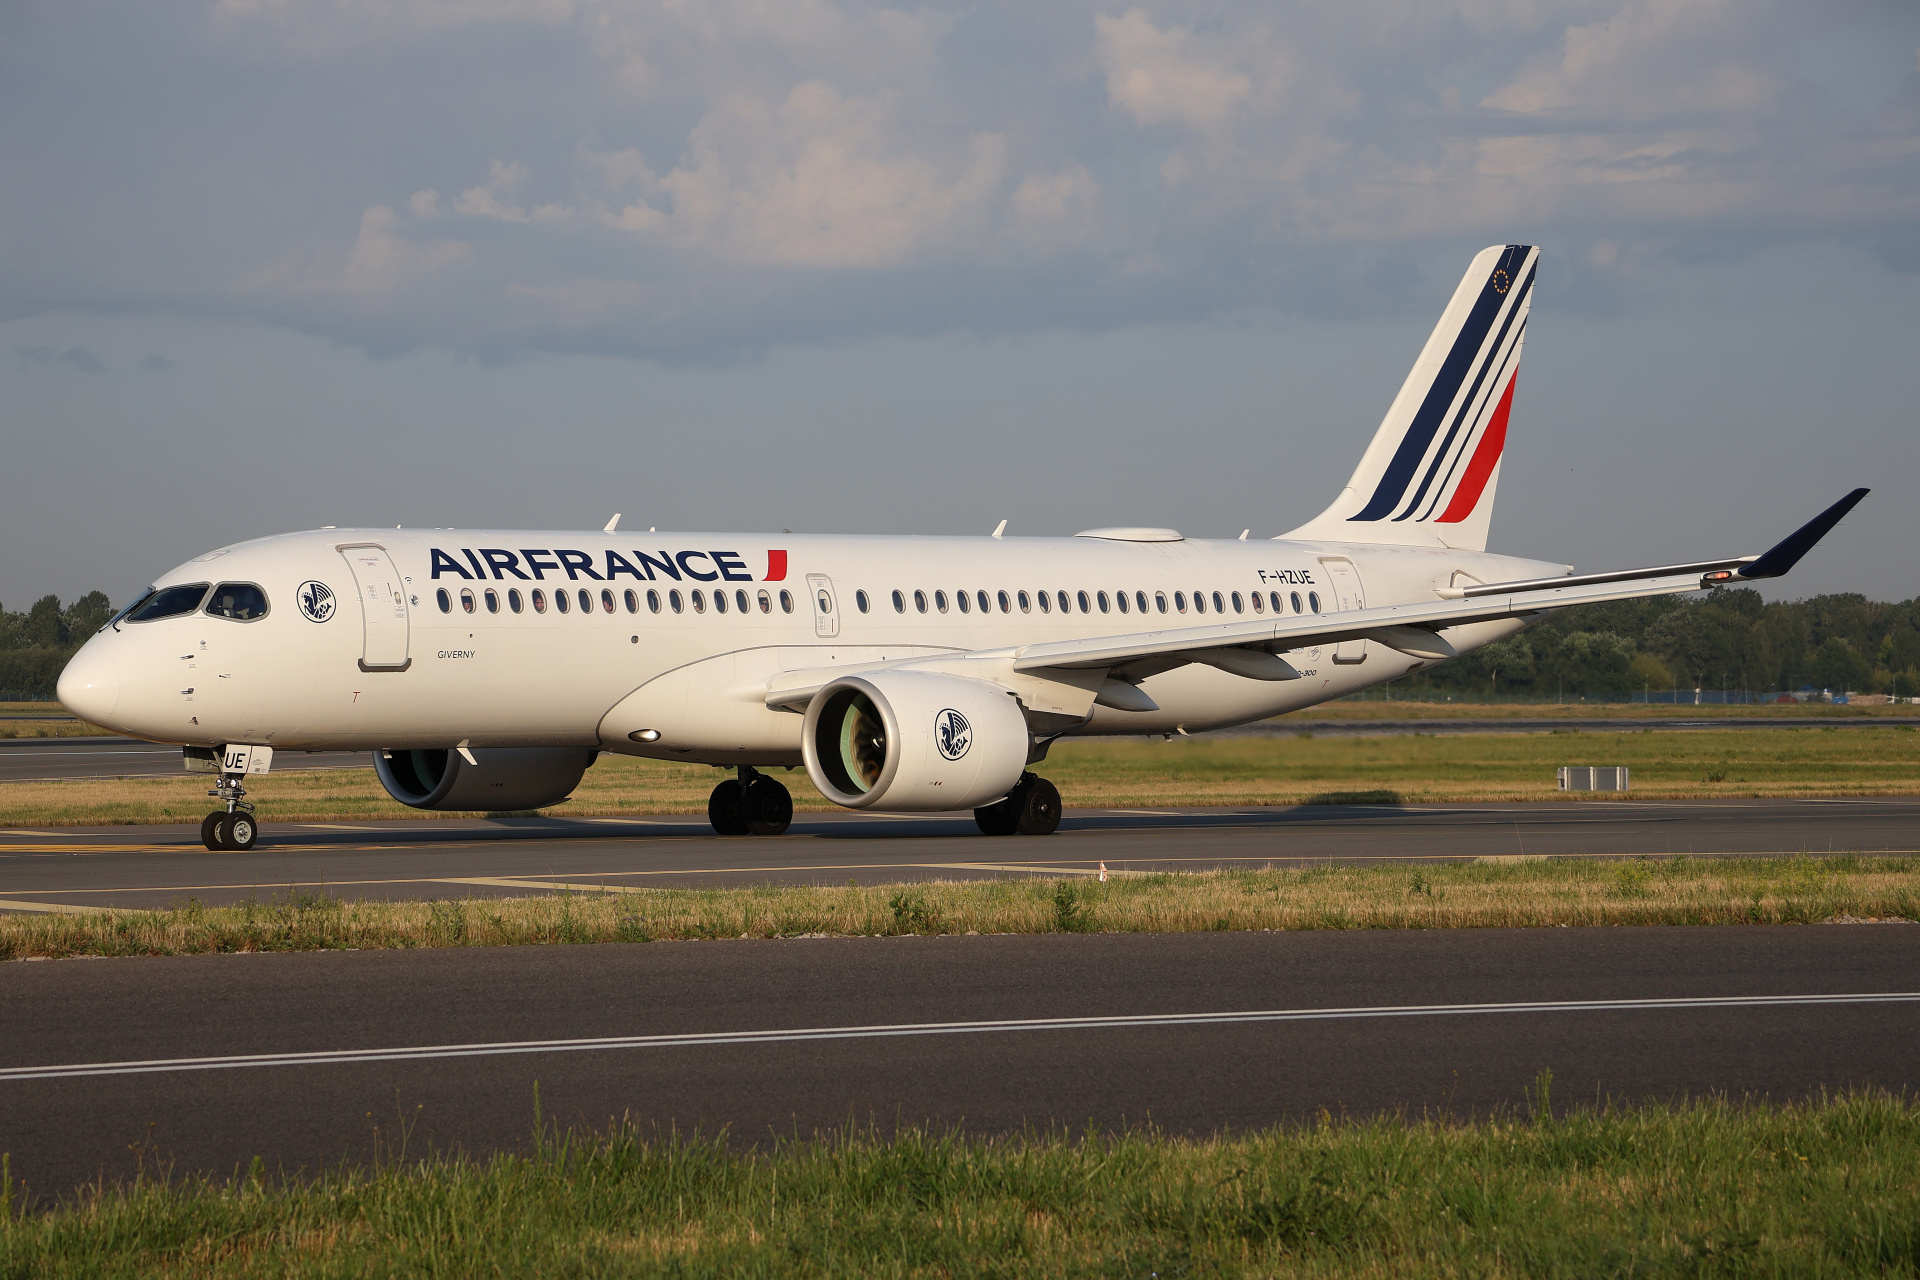 F-HZUE (Aircraft » EPWA Spotting » Airbus A220-300 » Air France)